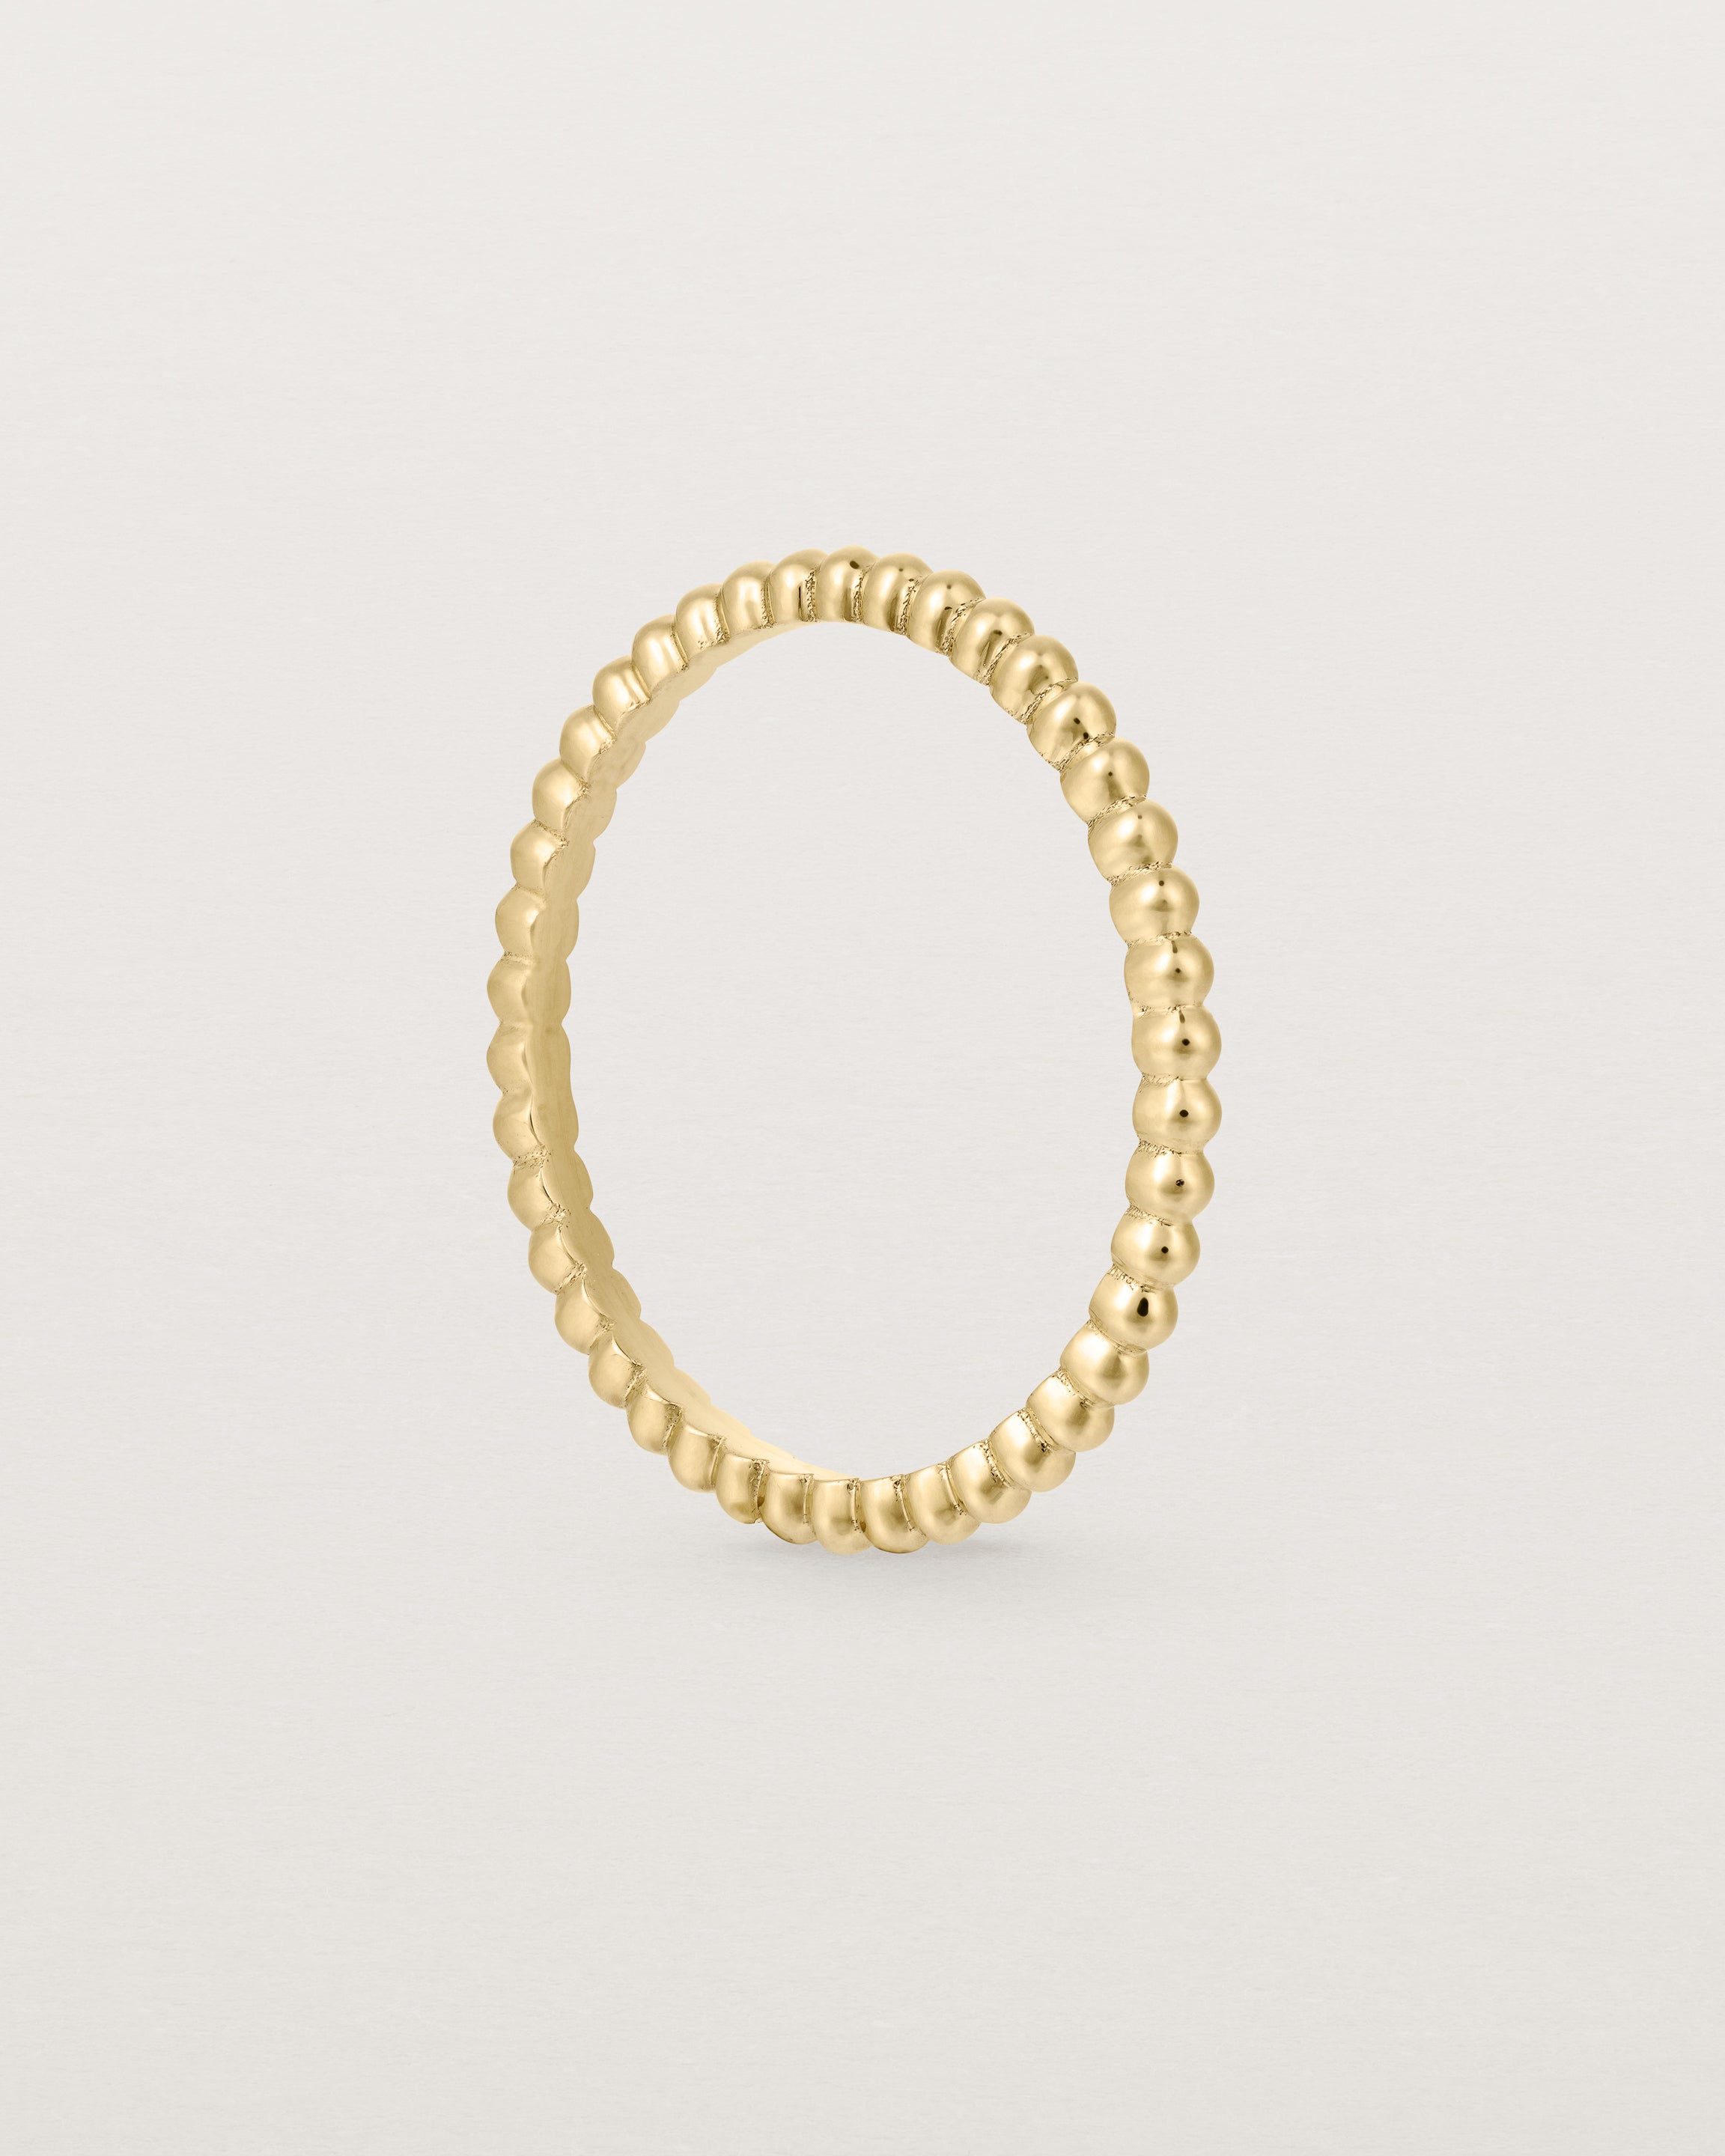 Standing view of the Dotted Stacking Ring in Yellow Gold.